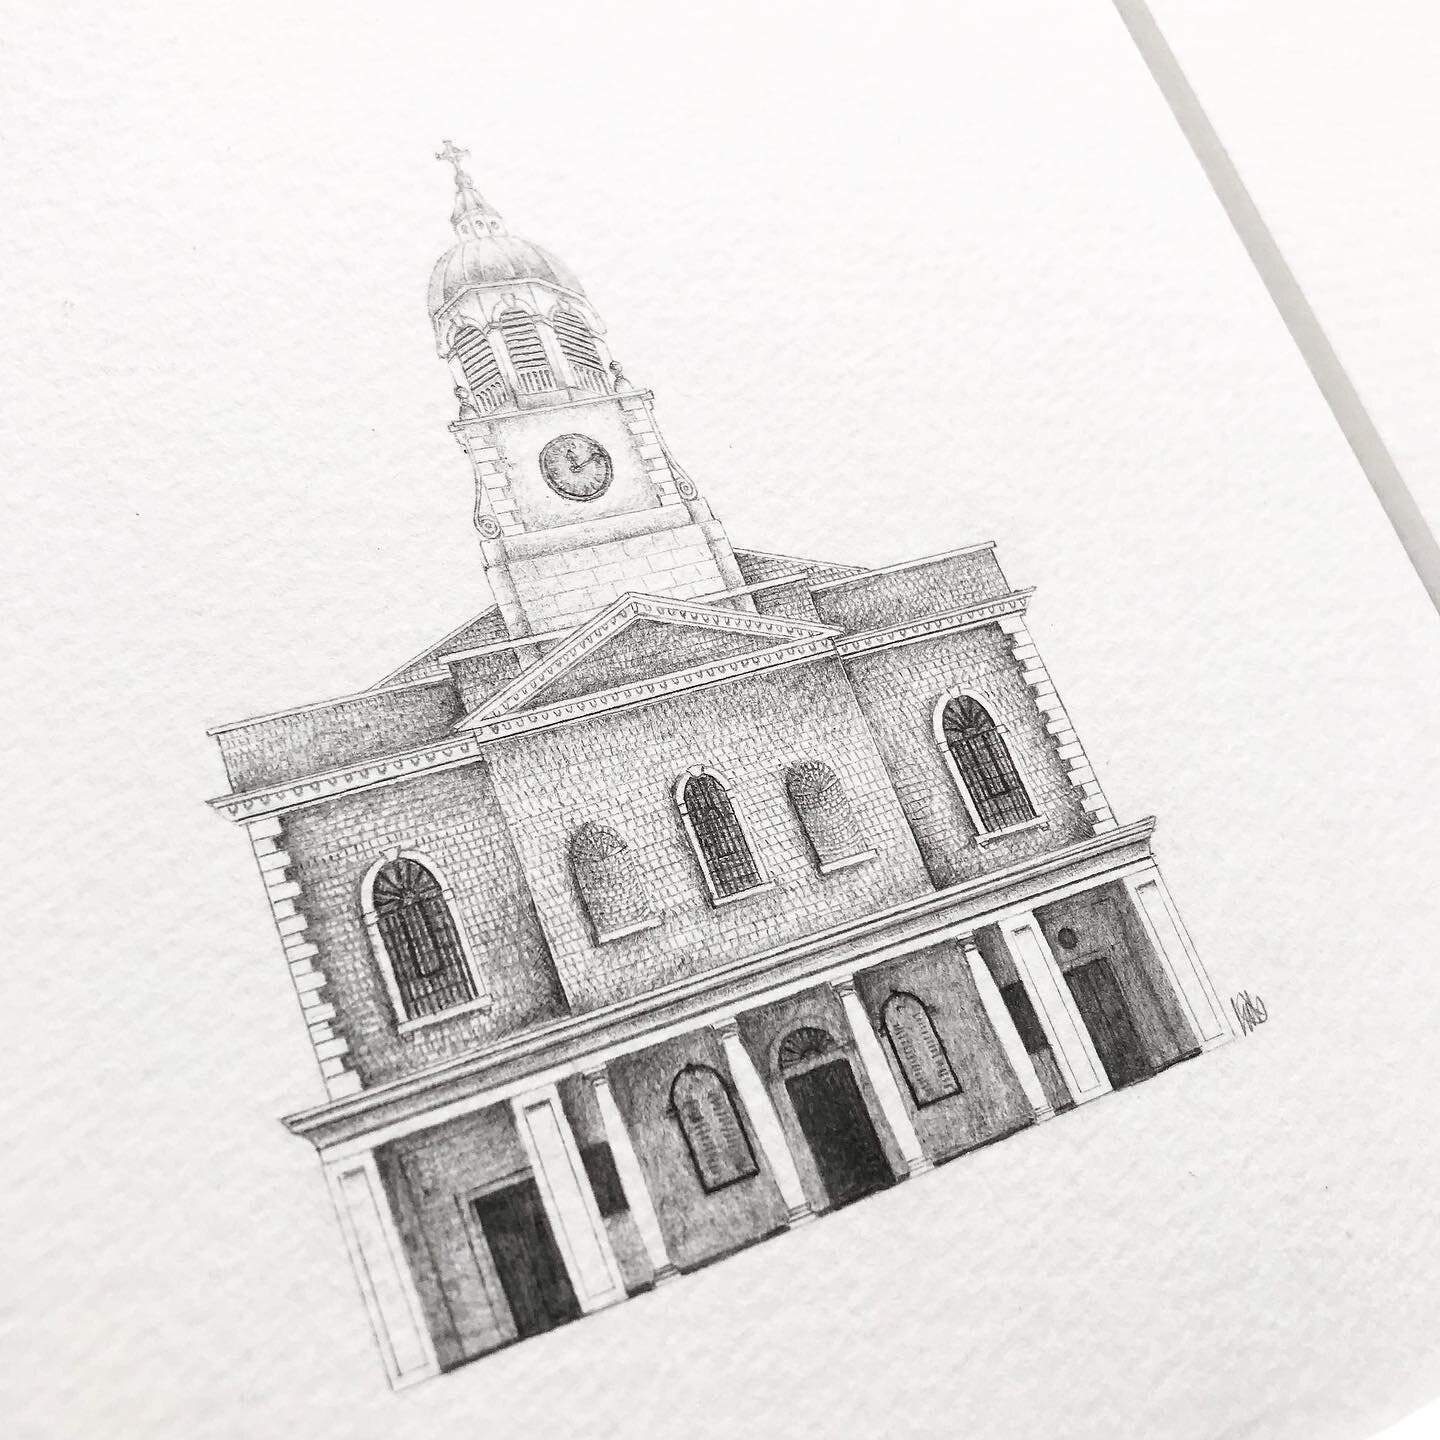 With weddings happening again it has been a pleasure to draw the majestic churches #weddingpresent #orderofservice #pencildrawing #minature #allthedetails #commission #trinityclapham #claphamcommon #holytrinityclapham